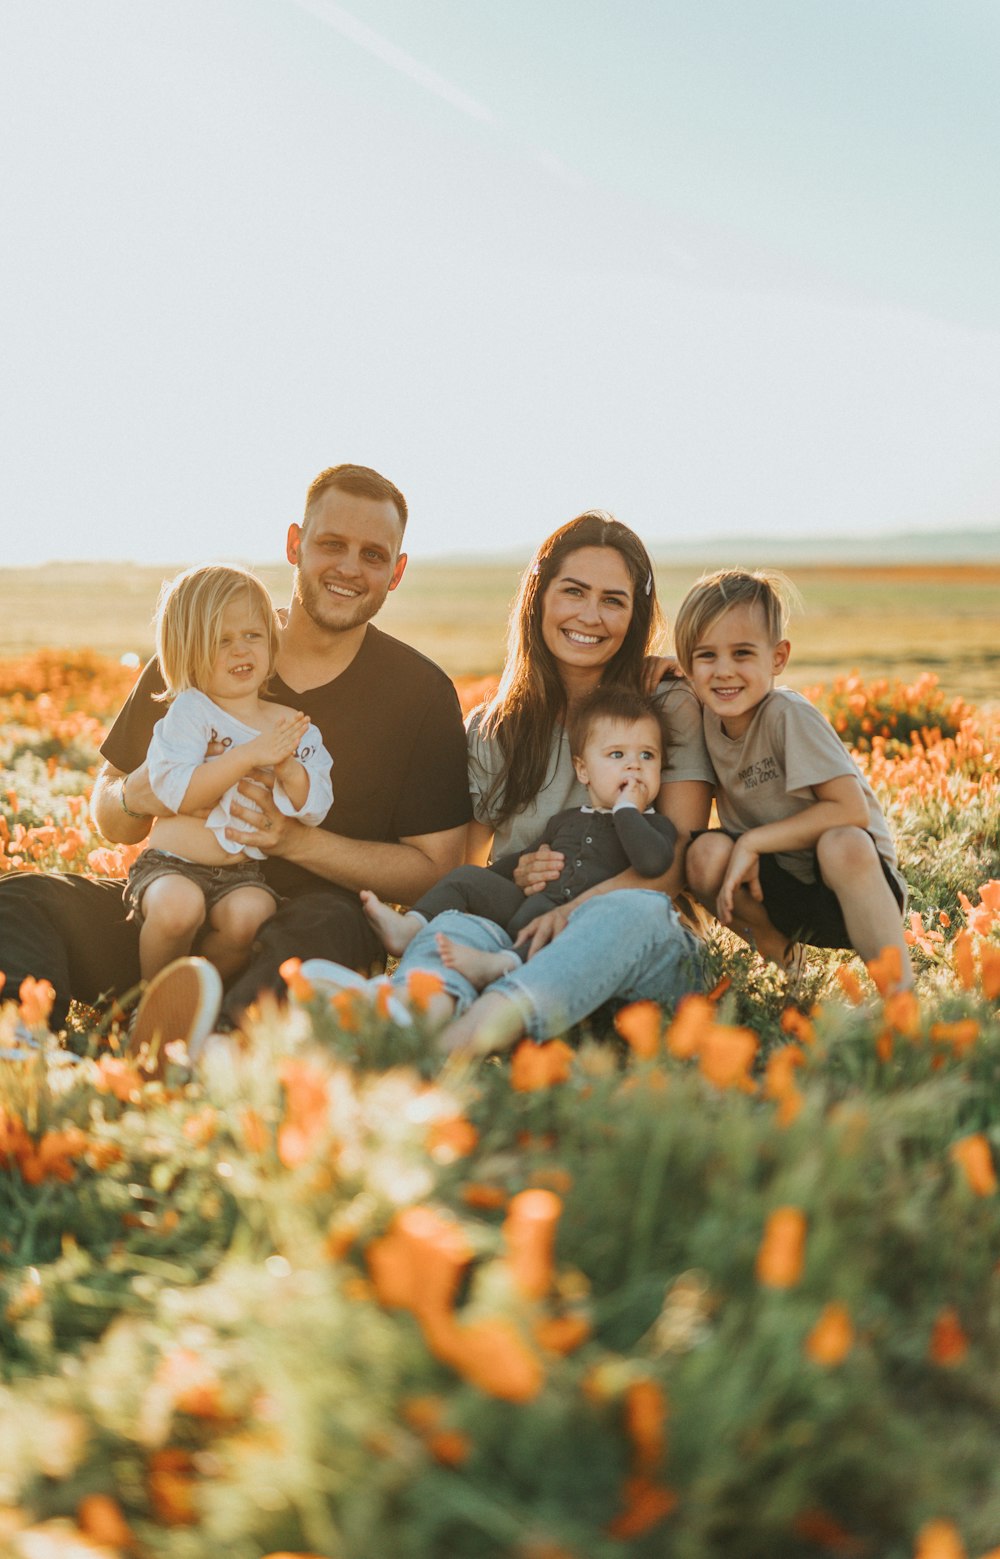 500+ Happy Family Pictures | Download Free Images on Unsplash